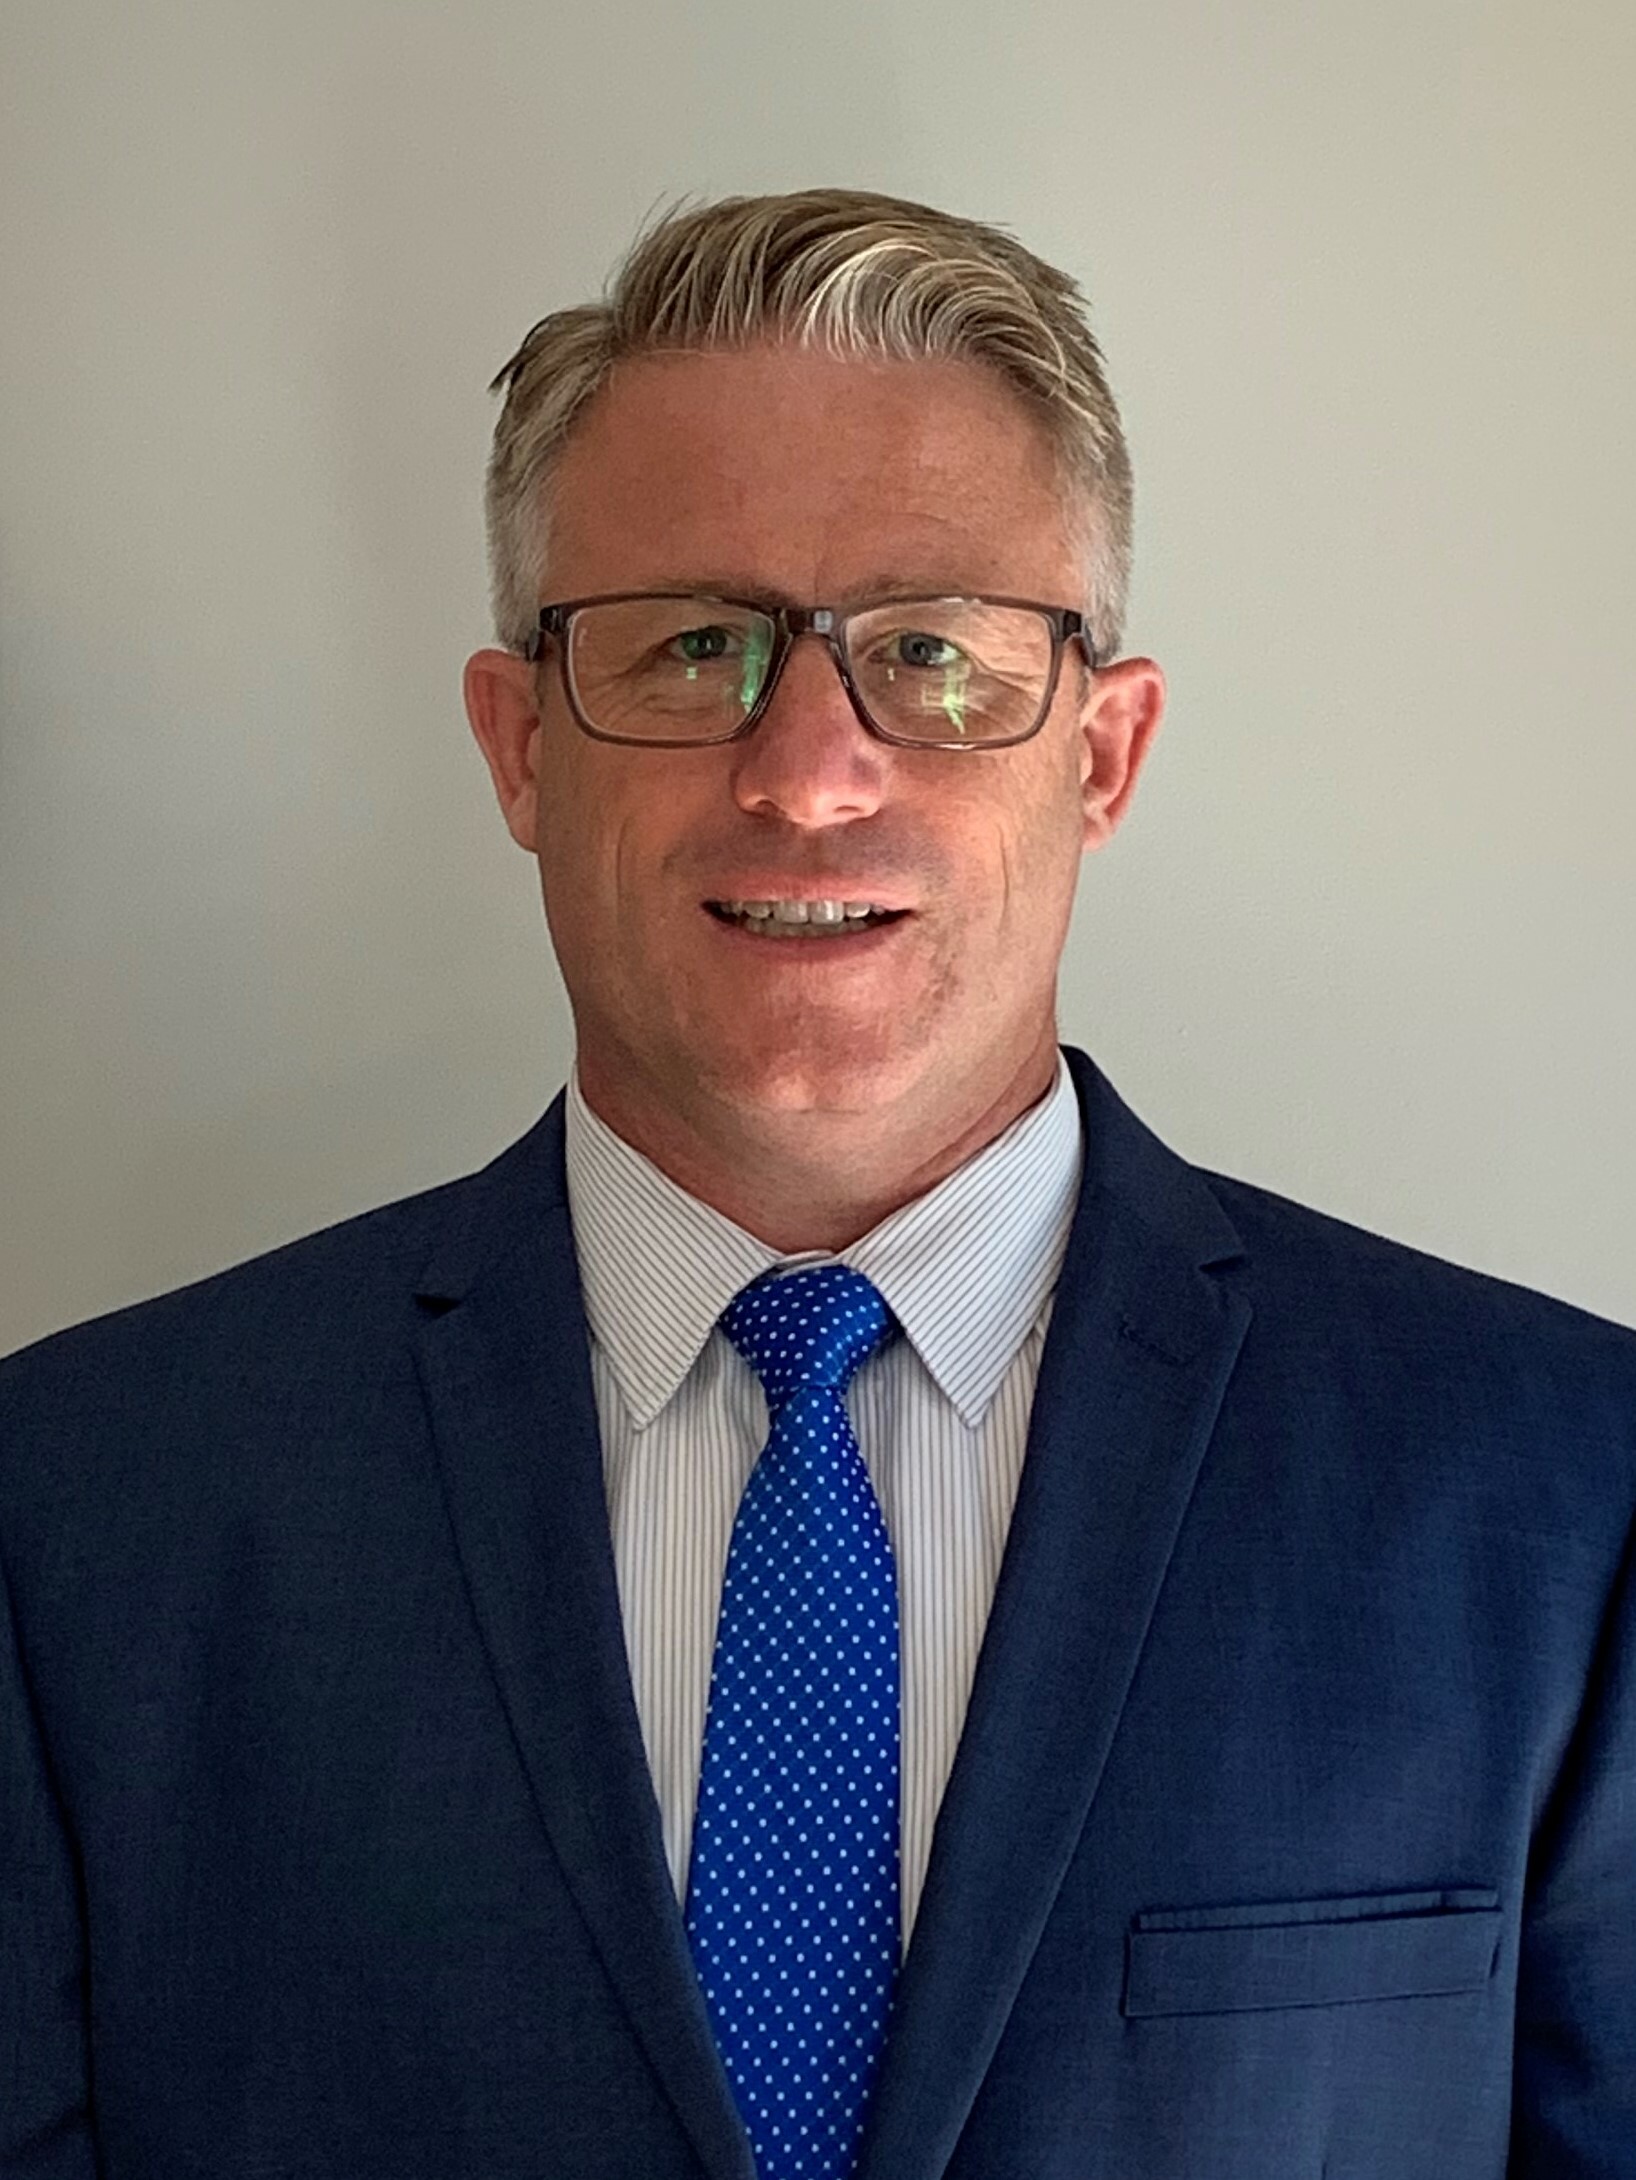 The Southampton School District has appointed Michael Connell as the new Southampton Intermediate School assistant principal.